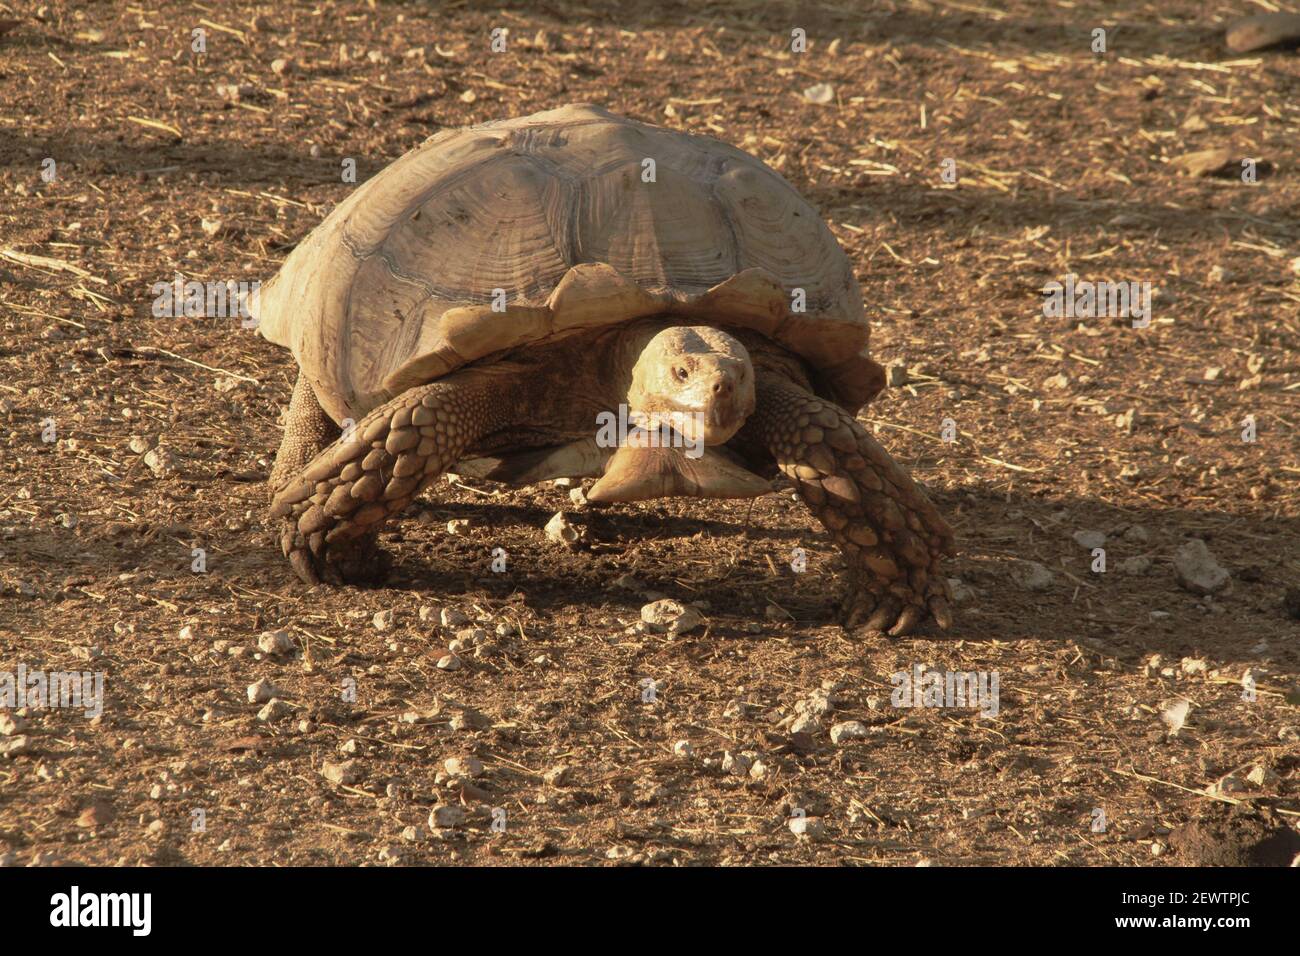 Large Sulcata tortoise in captivity in the USA Stock Photo